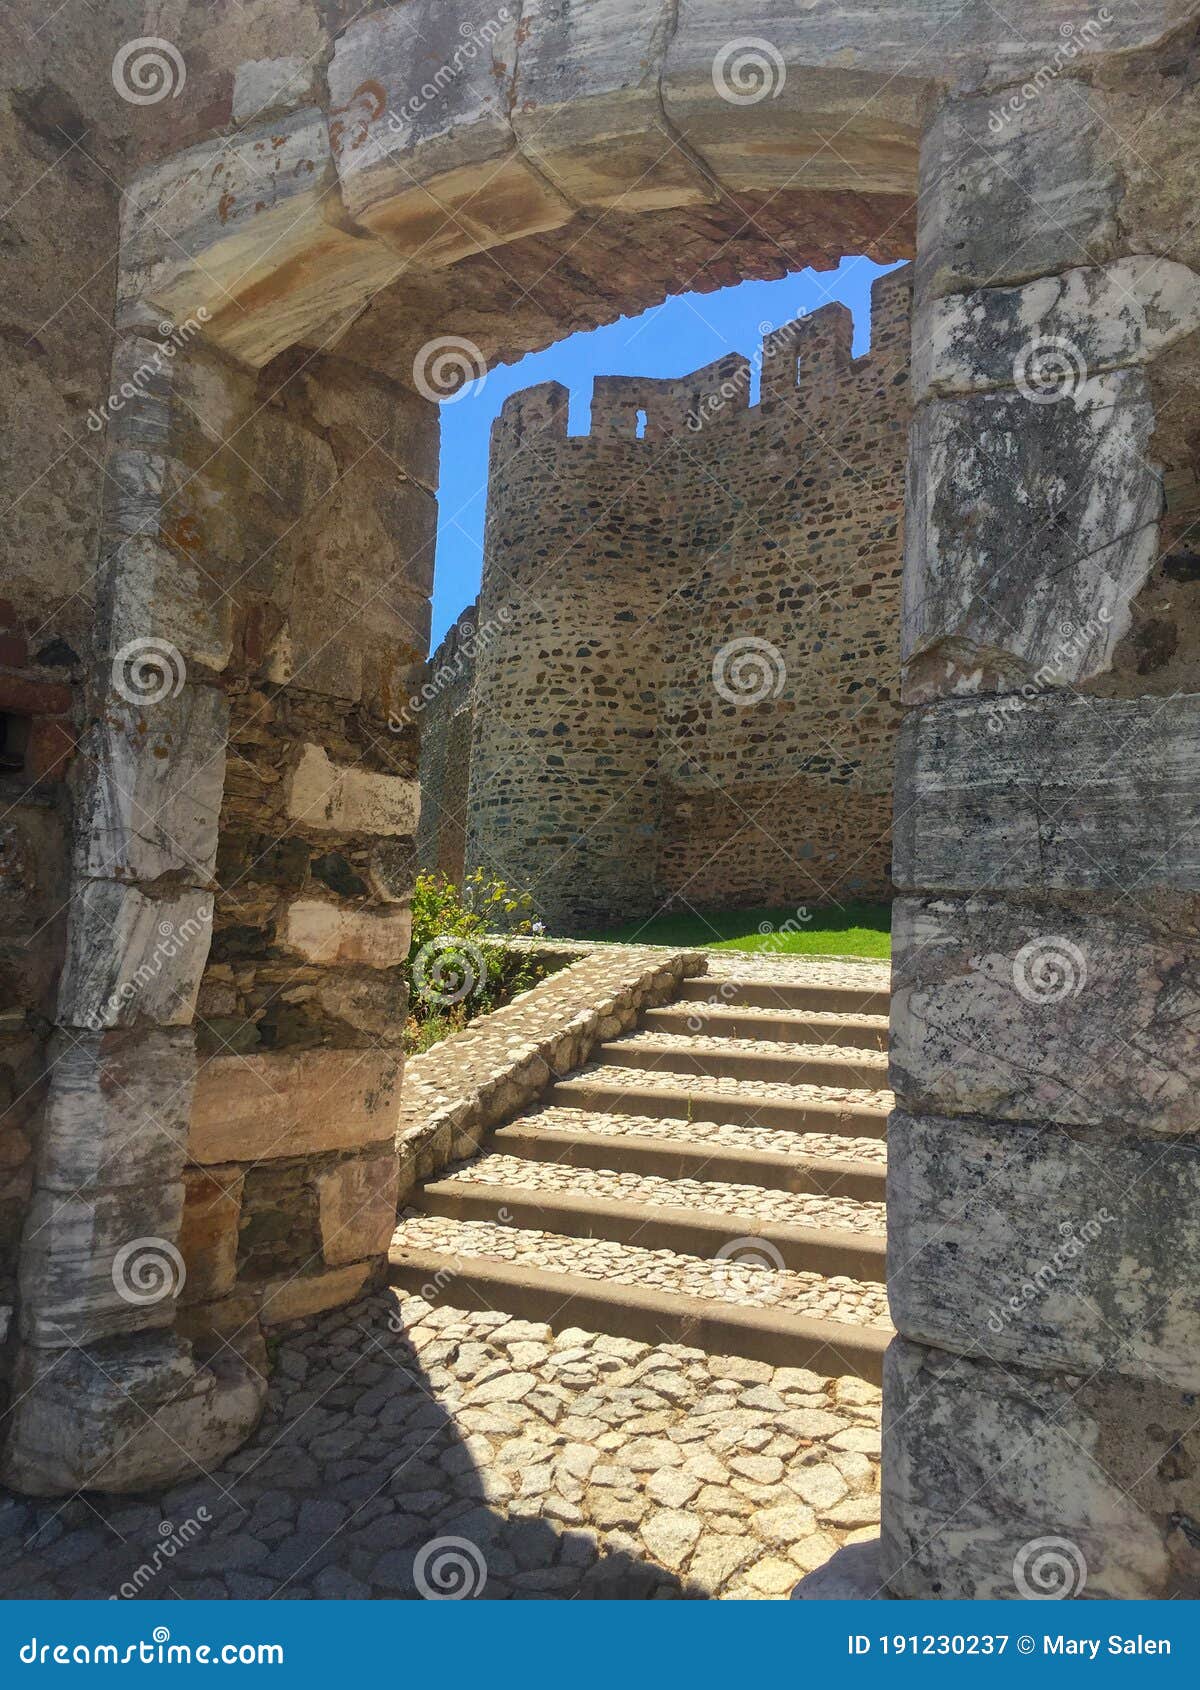 Medieval Castle through Door in Wall. Stock Image - Image of house